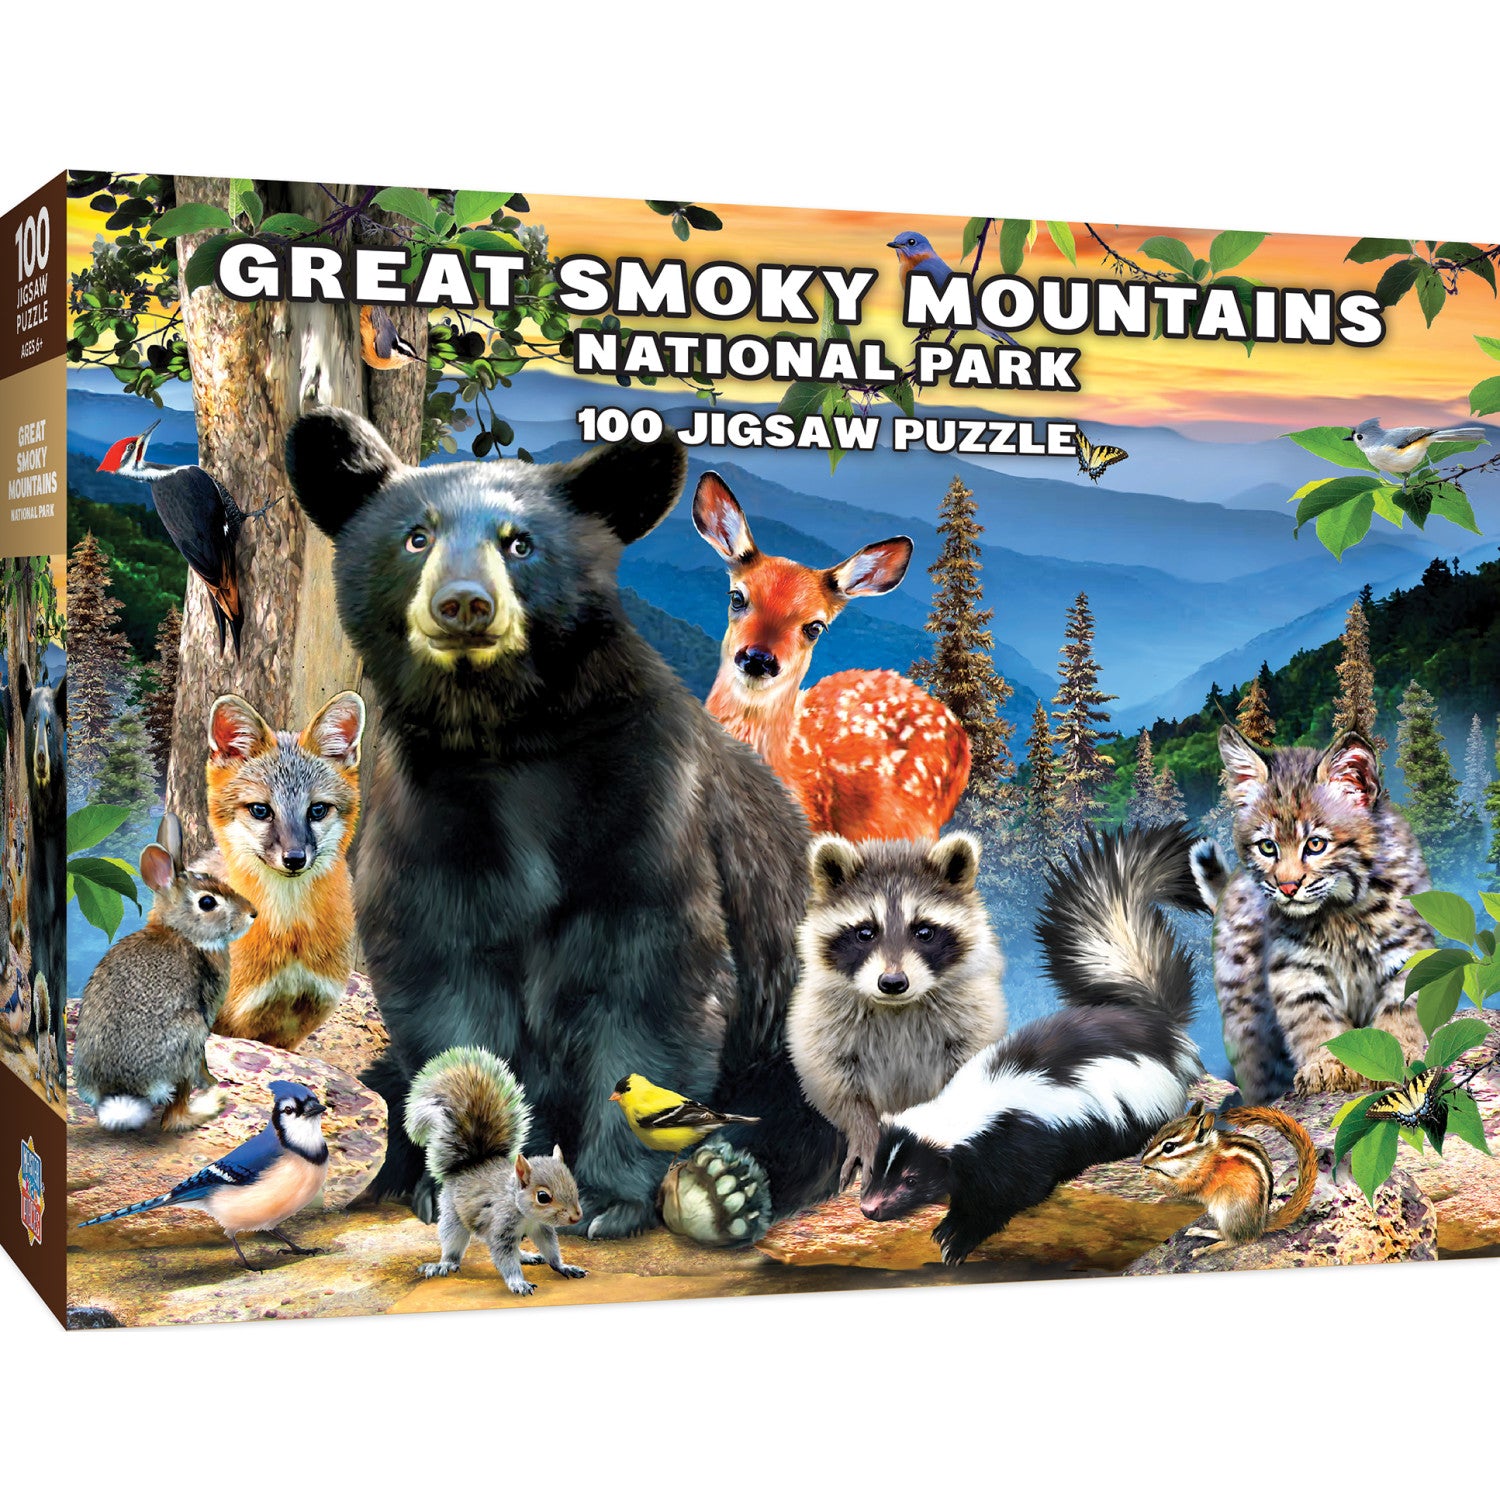 Wildlife of Great Smoky Mountains National Park - 100 Piece Jigsaw Puzzle